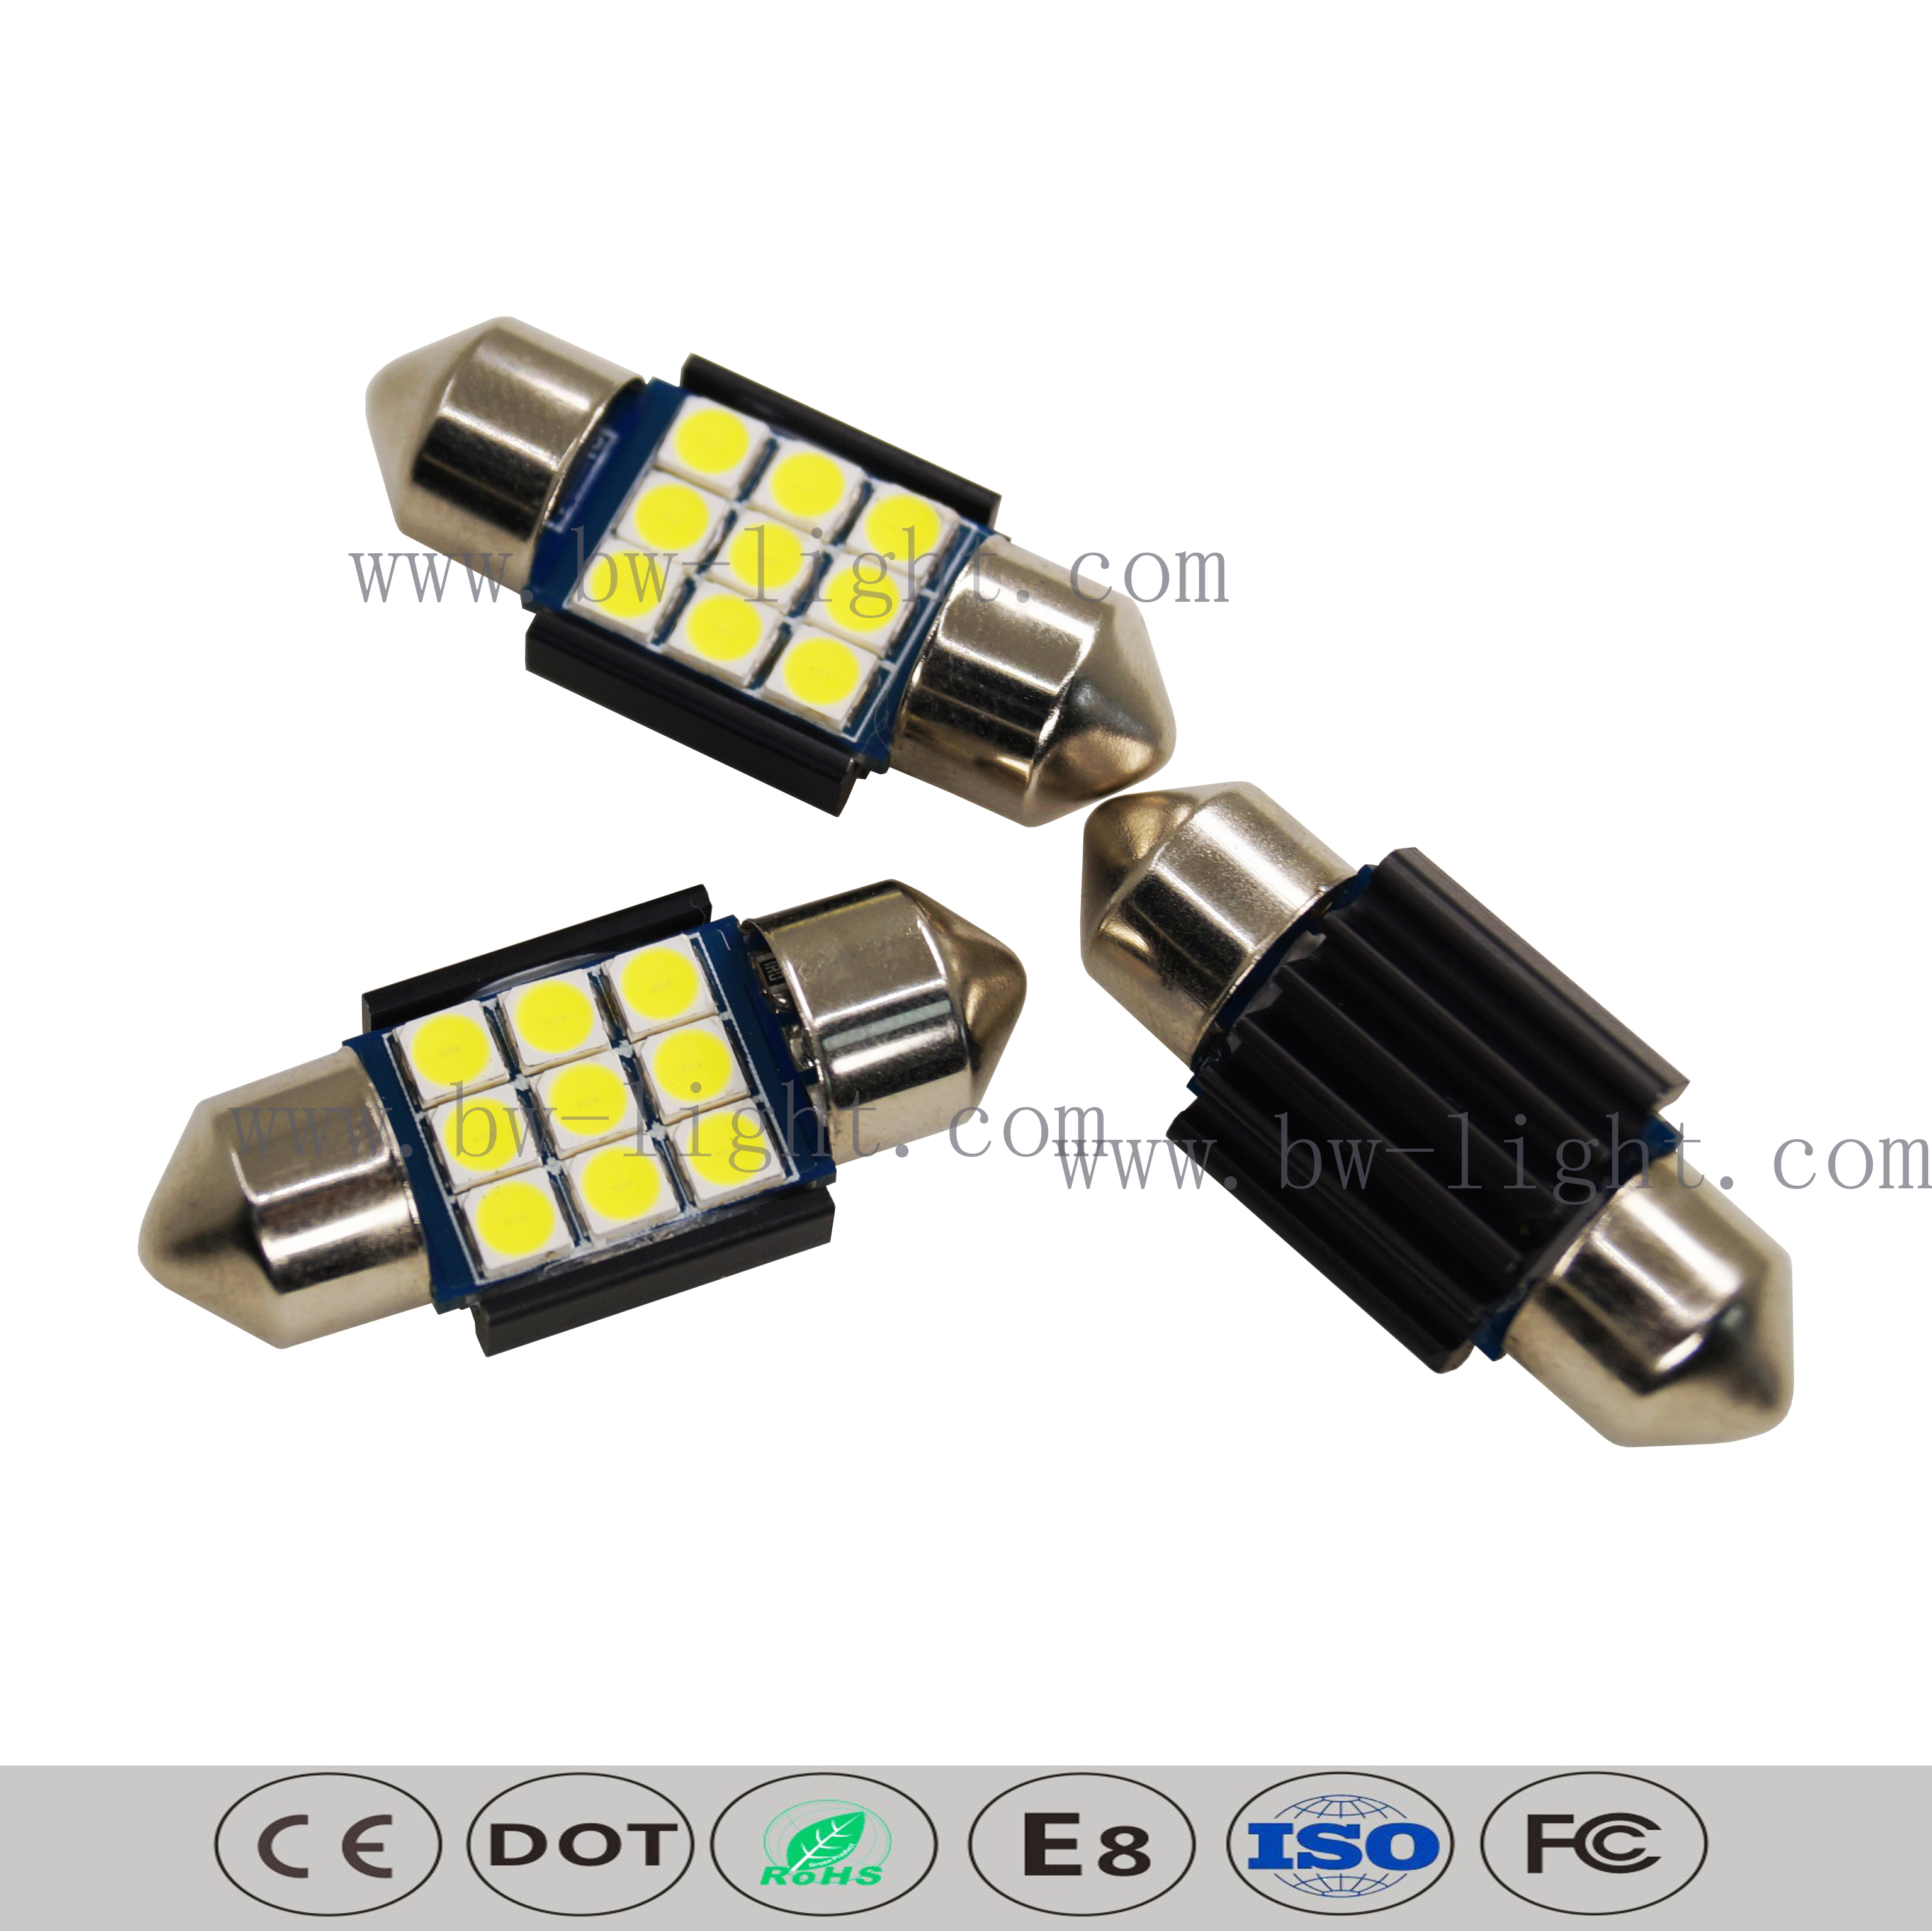 31mm 2W Canbus LED License Plate Lamps 